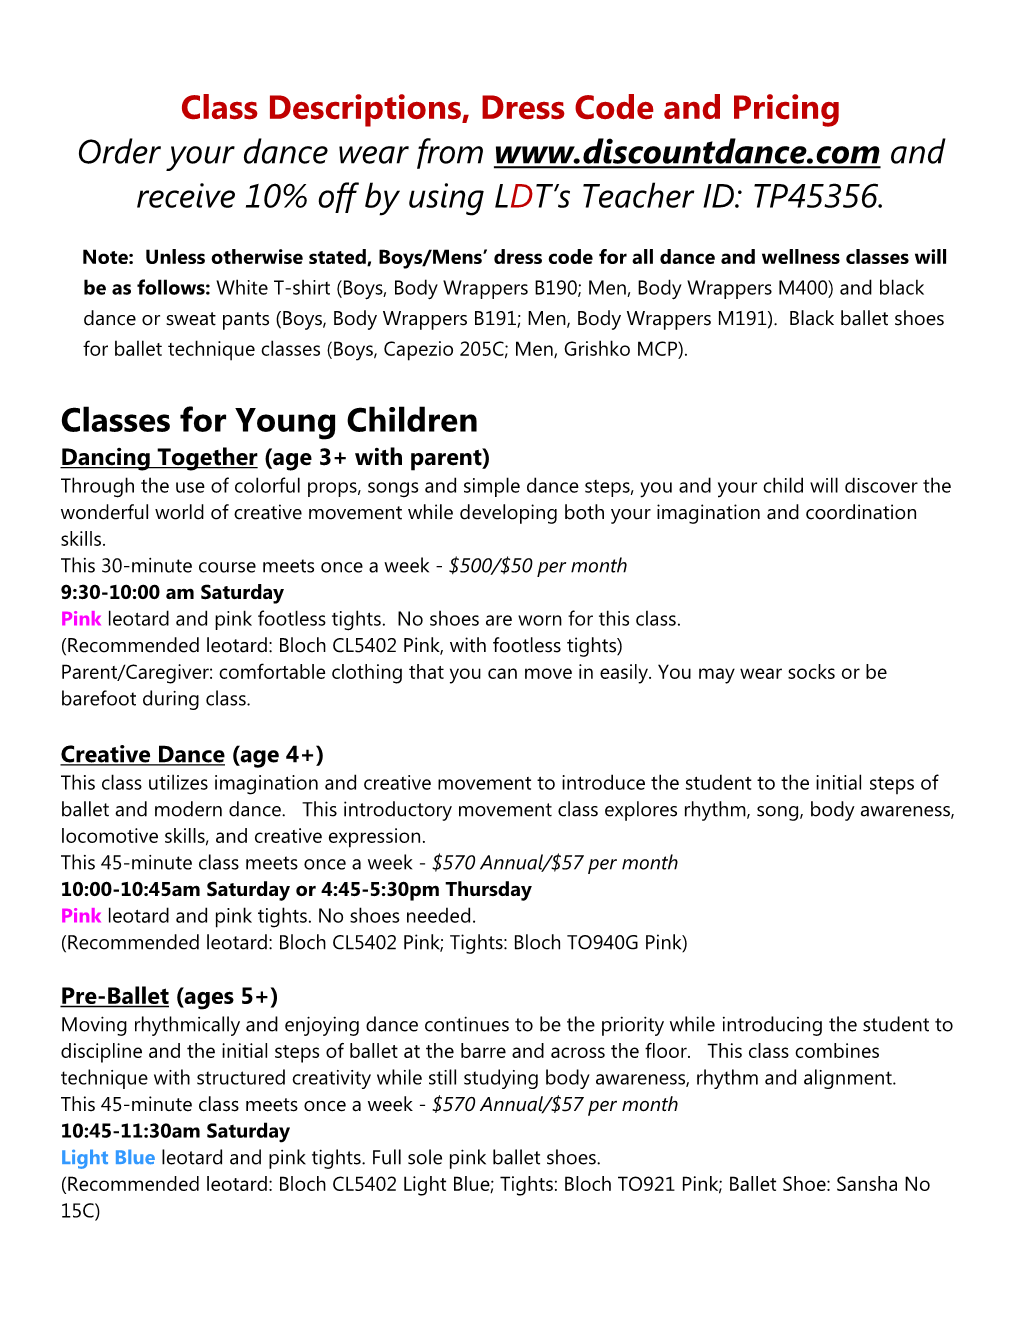 Class Descriptions, Dress Code and Pricing Order Your Dance Wear from and Receive 10% Off by Using LDT’S Teacher ID: TP45356